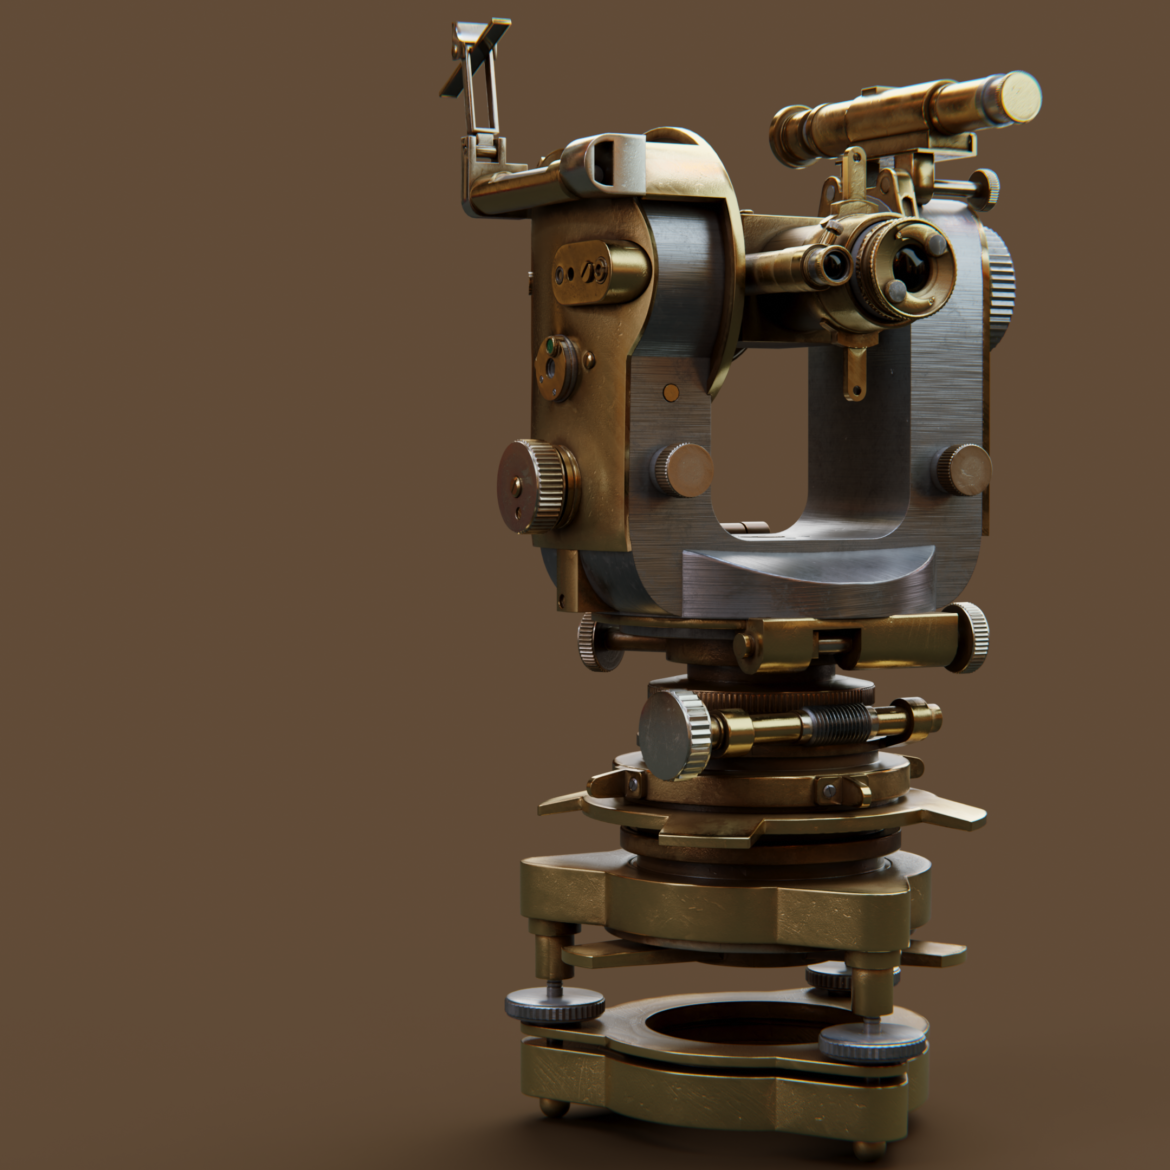  <a class="continue" href="https://www.flatpyramid.com/3d-models/science-and-technology-3d-models/vintage-theodolite/">Continue Reading<span> Vintage Theodolite</span></a>